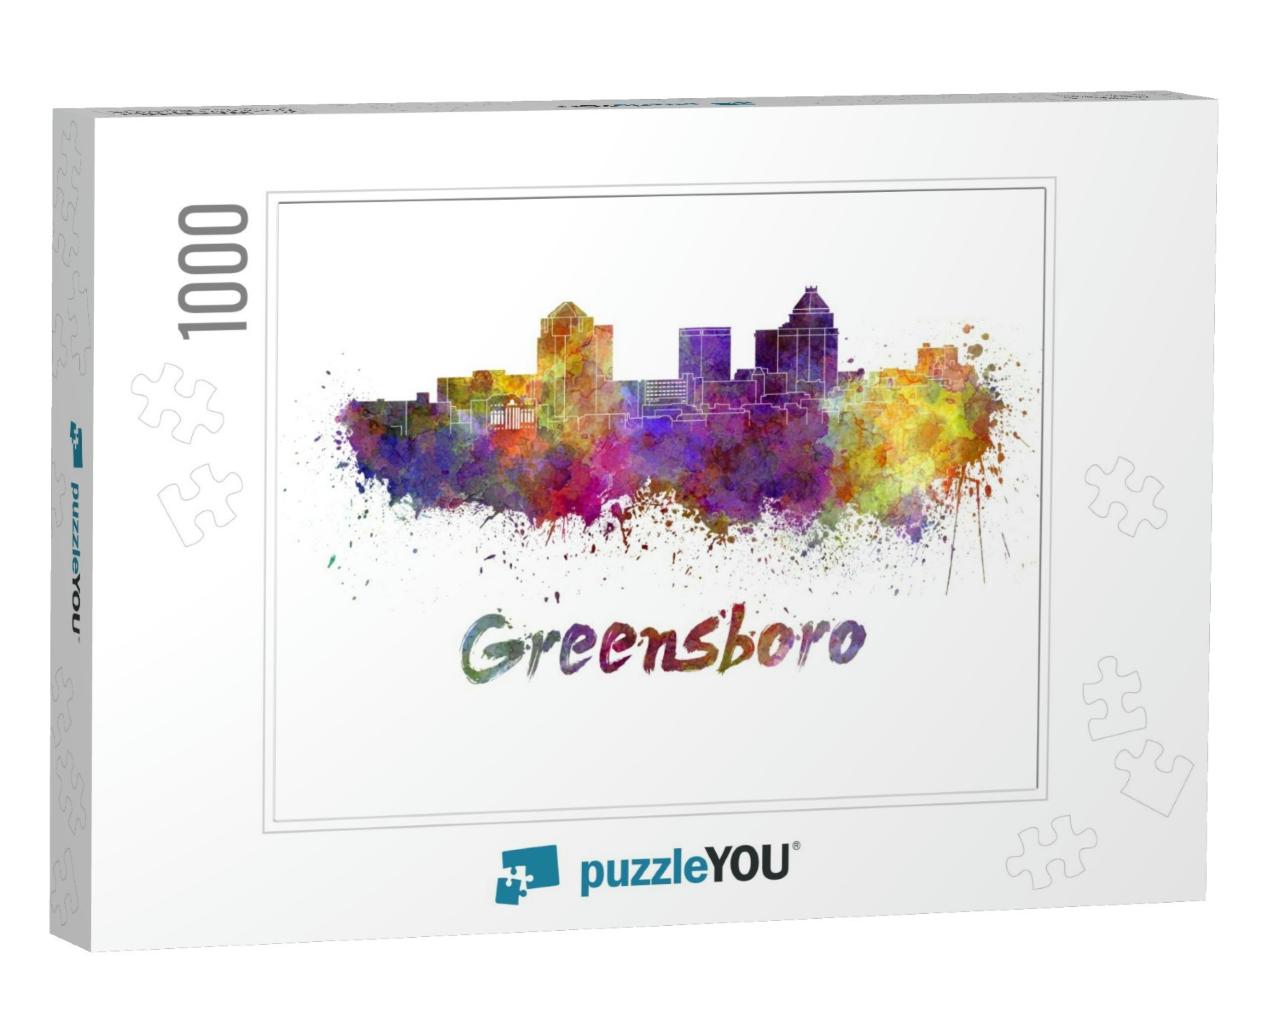 Greensboro Skyline in Watercolor Splatters with Clipping... Jigsaw Puzzle with 1000 pieces